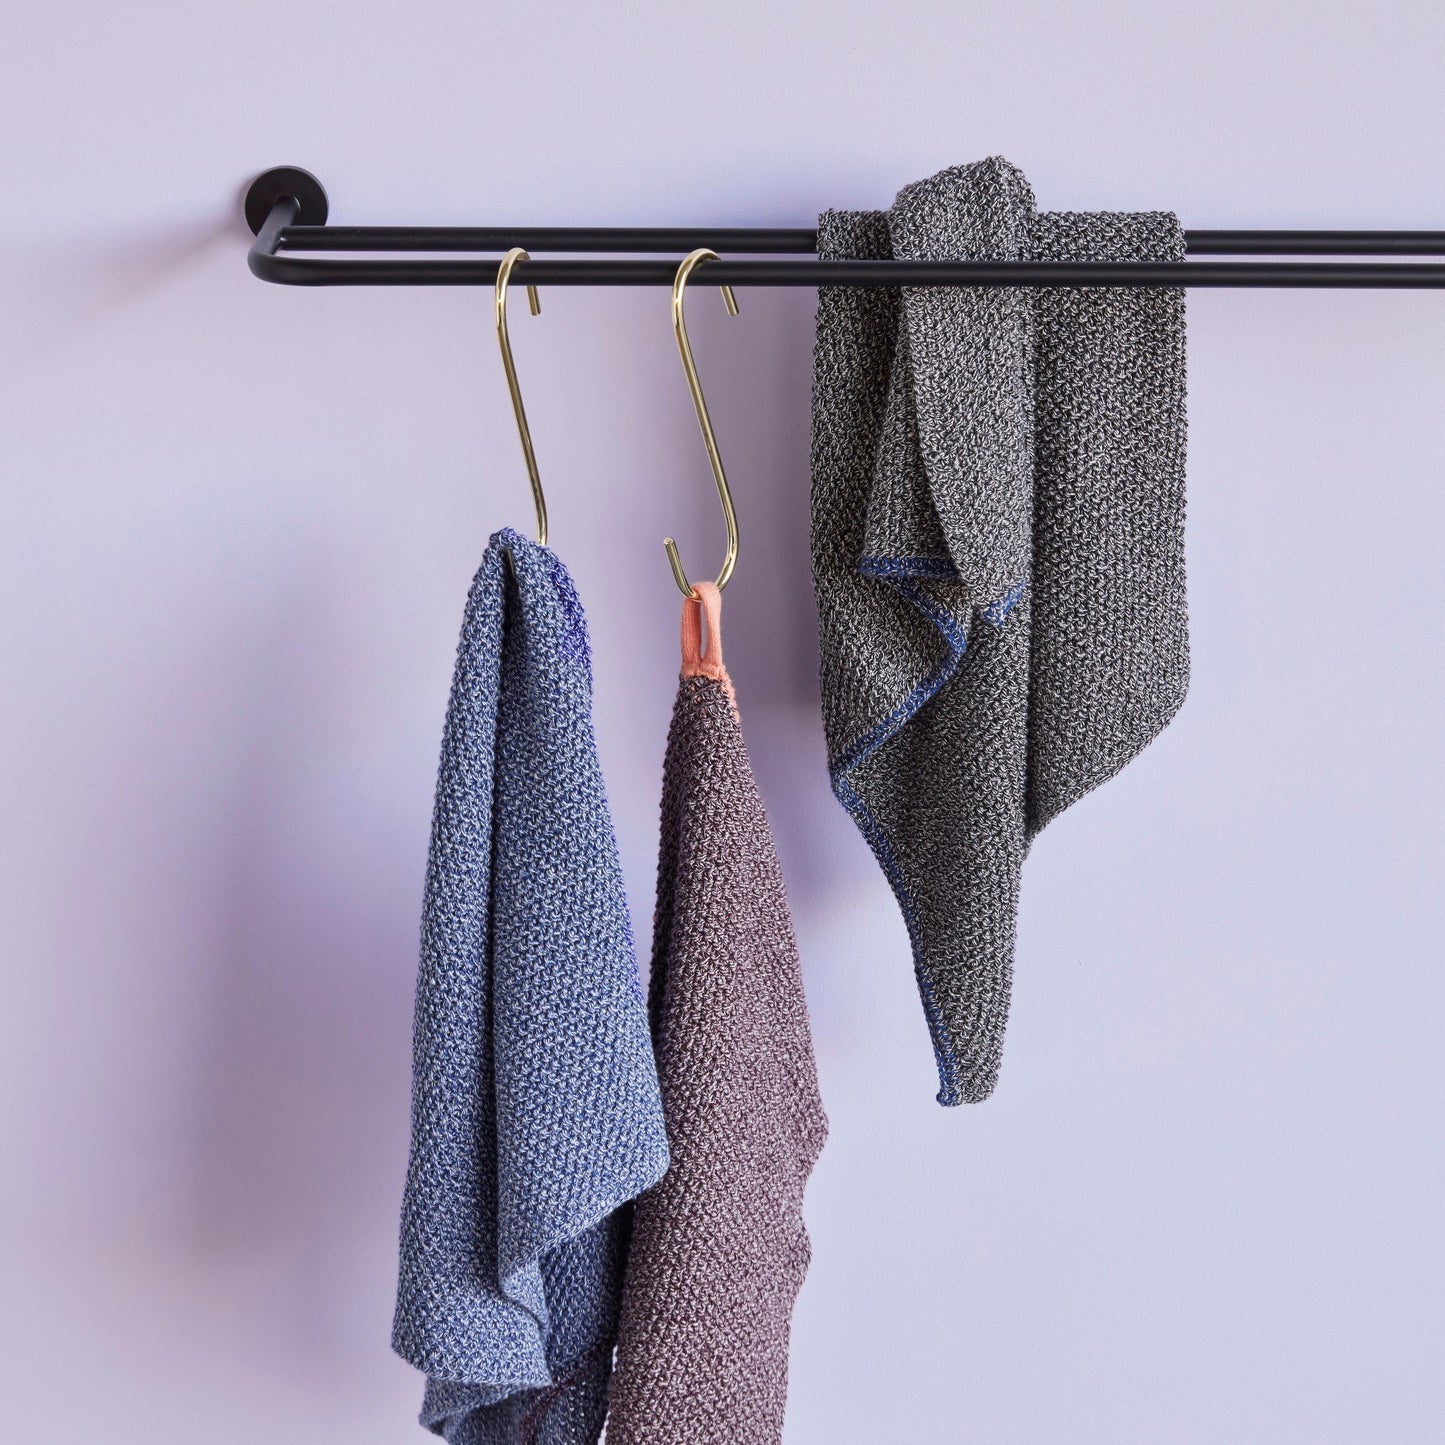 Three Hubsch Interior Scandi designer tea towels in various colours of cotton knit, hanging from a black towel rail